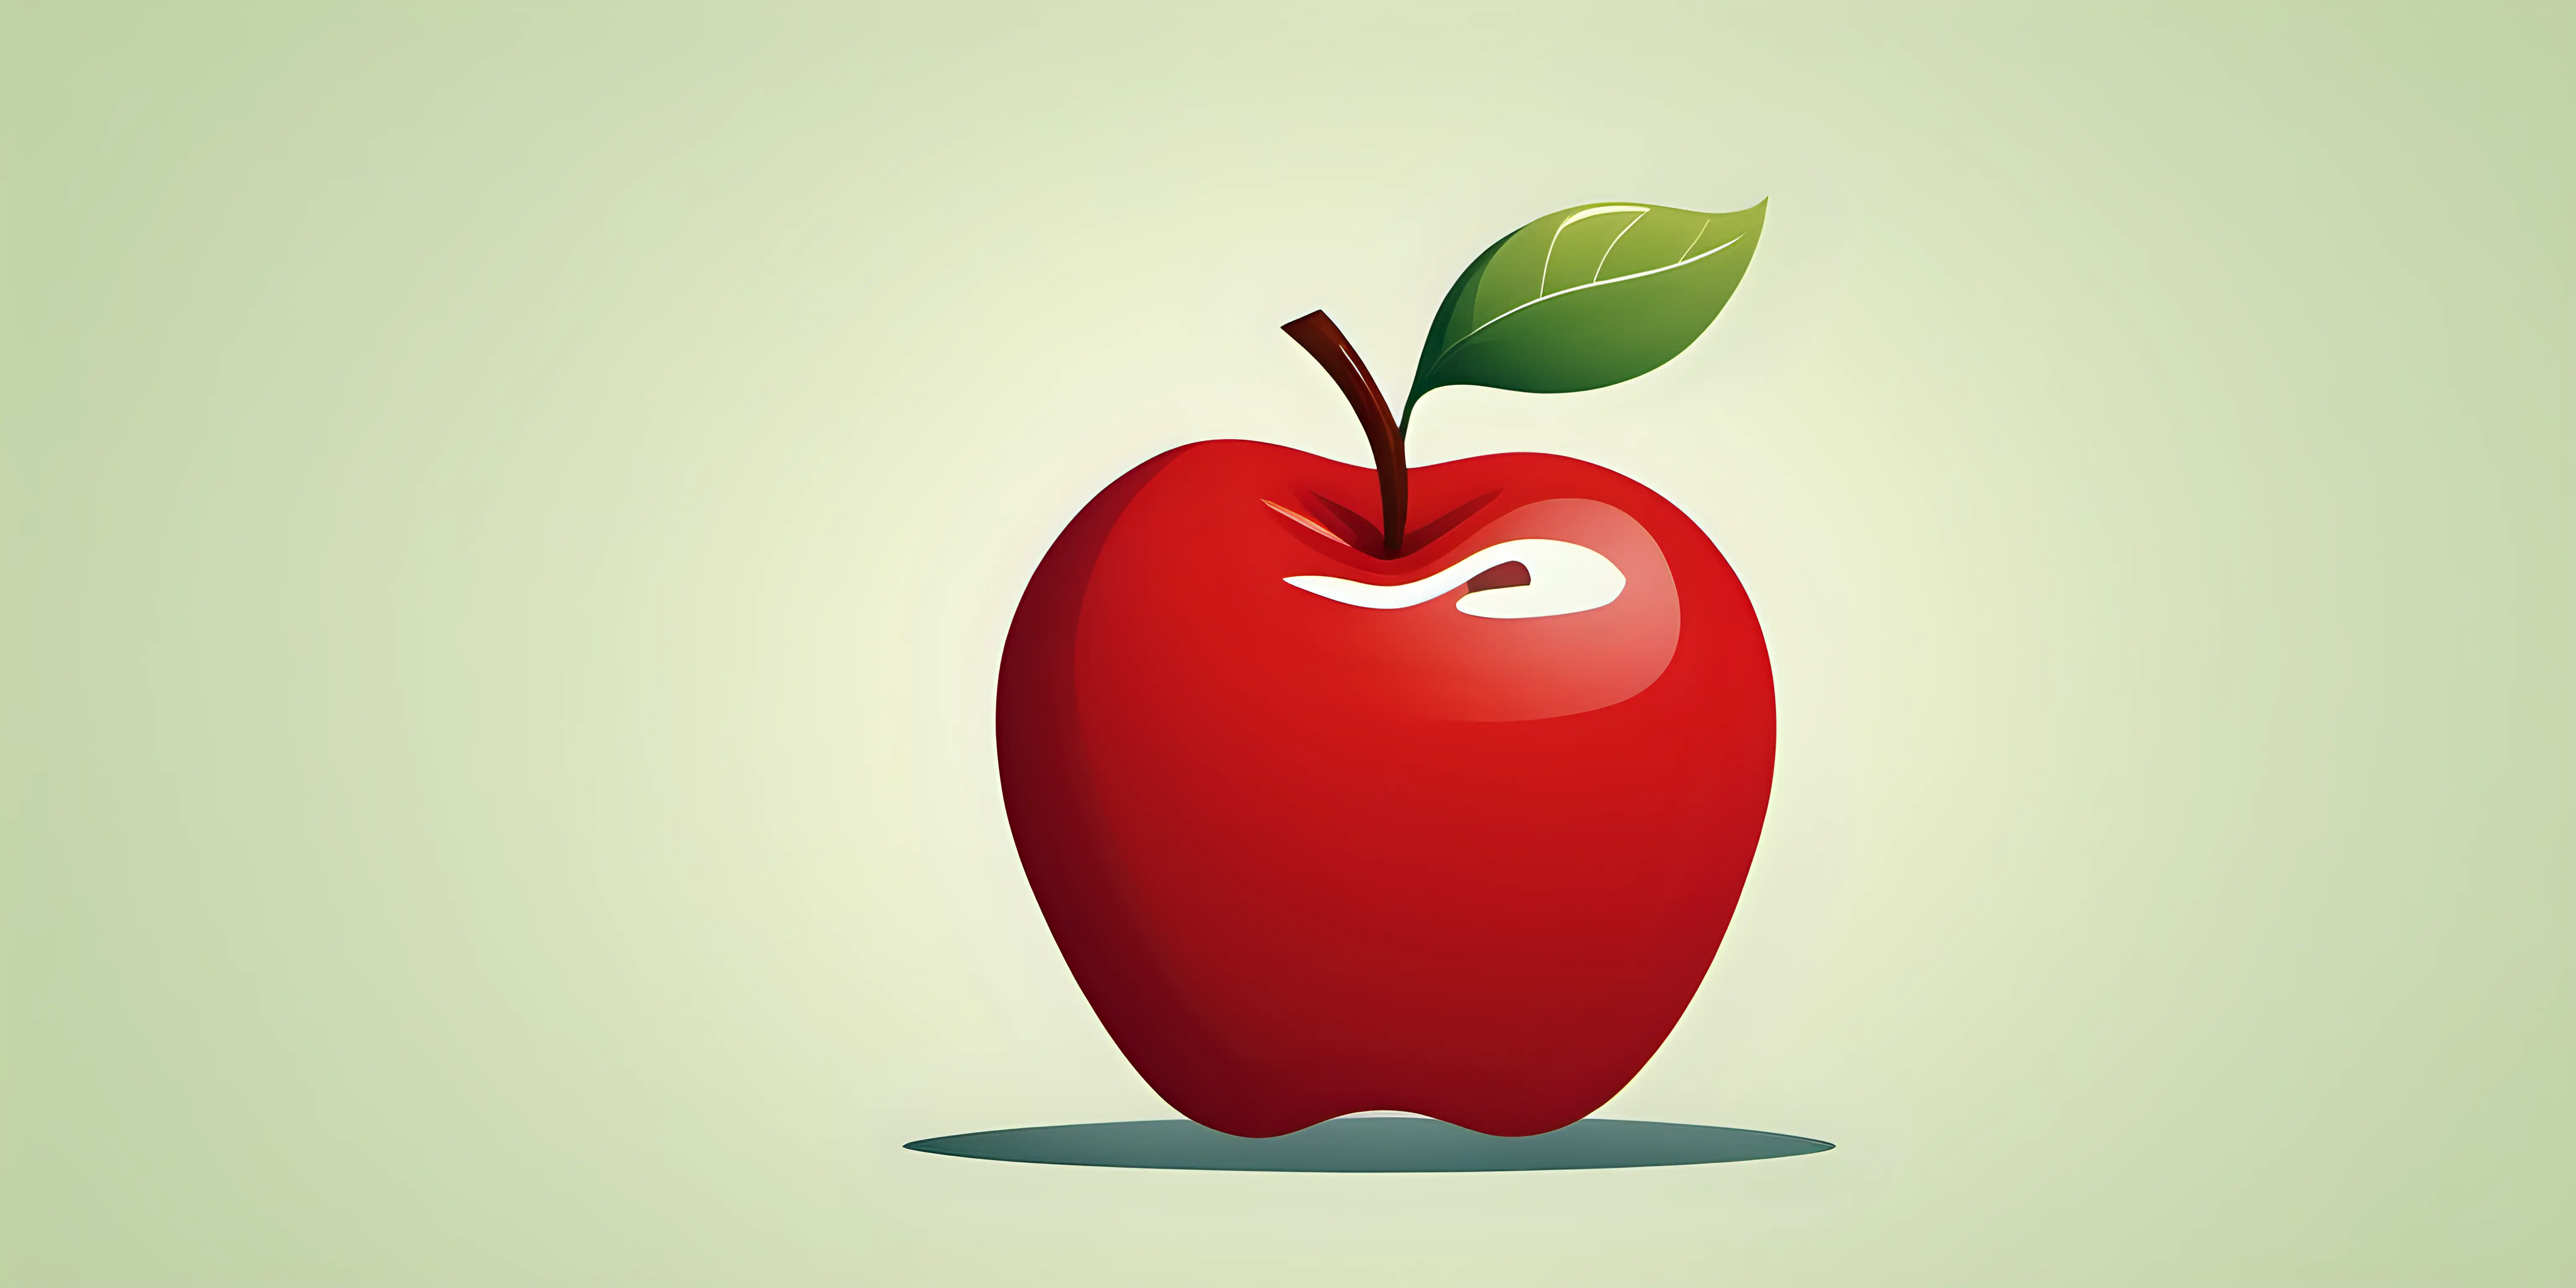 a colorful cartoon of a big red apple with no background